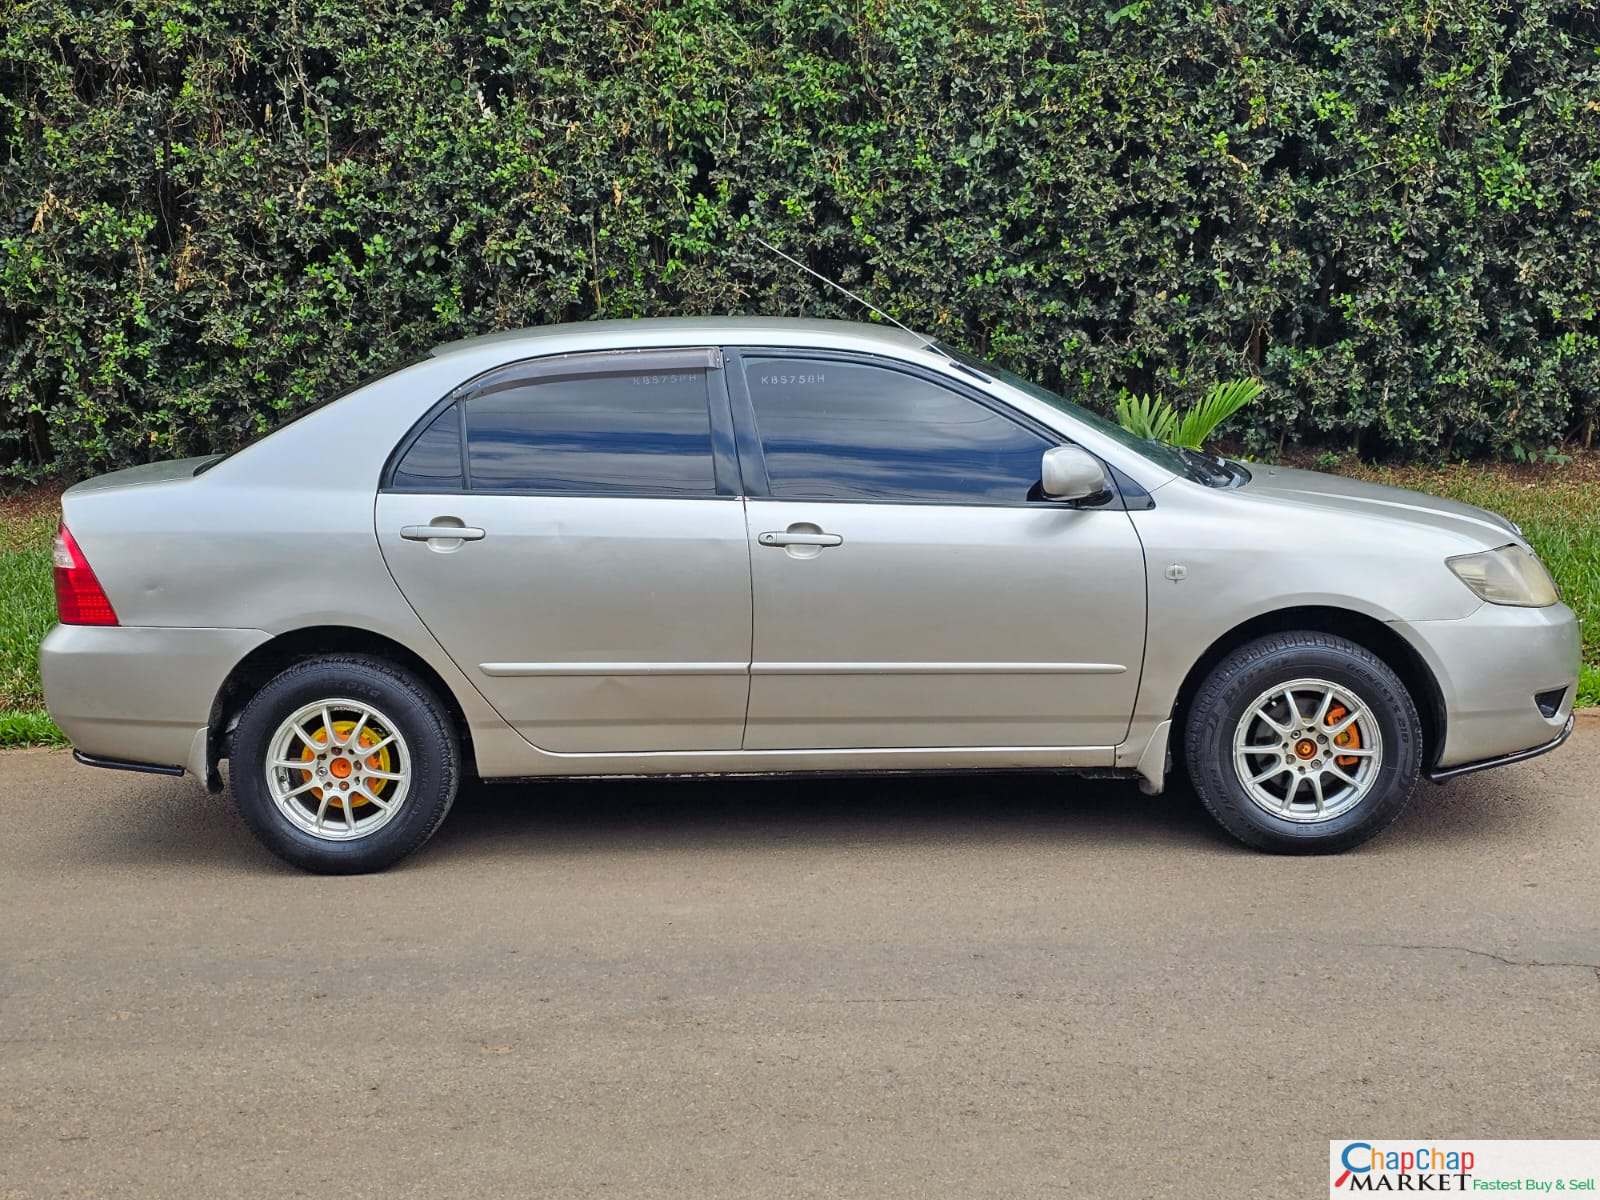 Cars Cars For Sale-Toyota Corolla NZE hire purchase installments QUICK SALE You Pay 30% Deposit Trade in OK EXCLUSIVE nze kenya 9